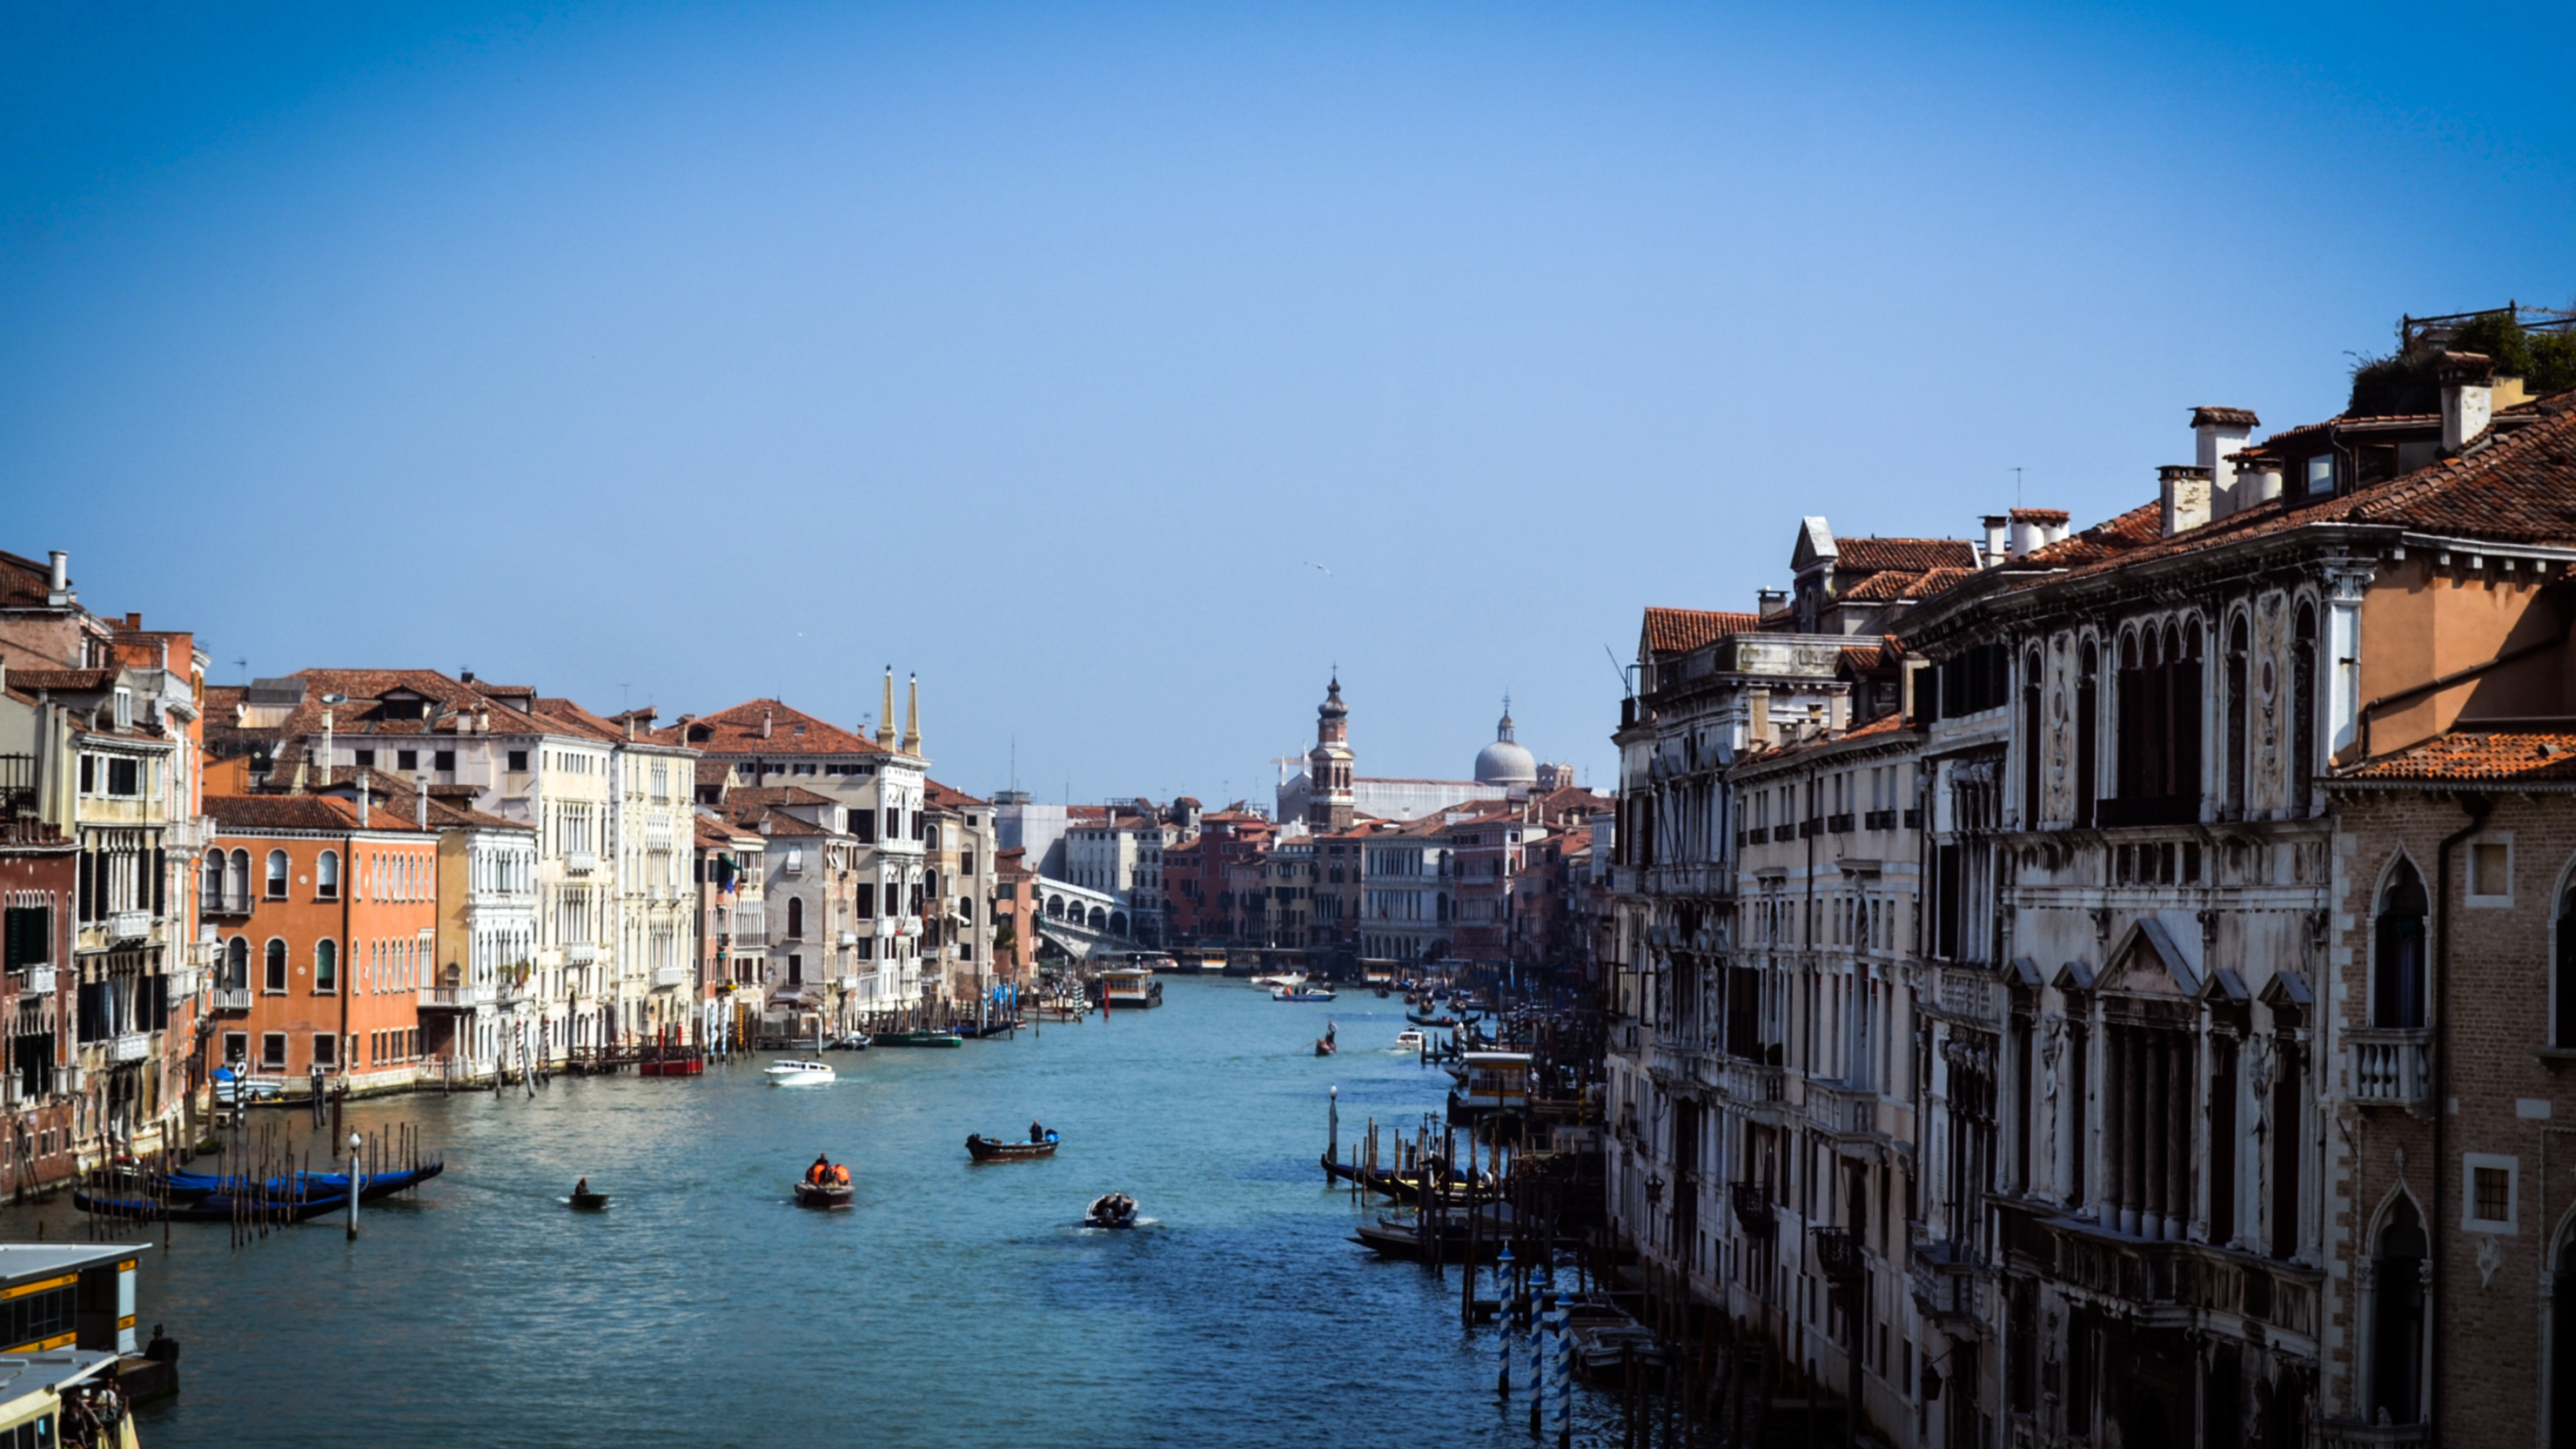 Venice: The city is located in the shallow Venetian Lagoon. 3840x2160 4K Wallpaper.